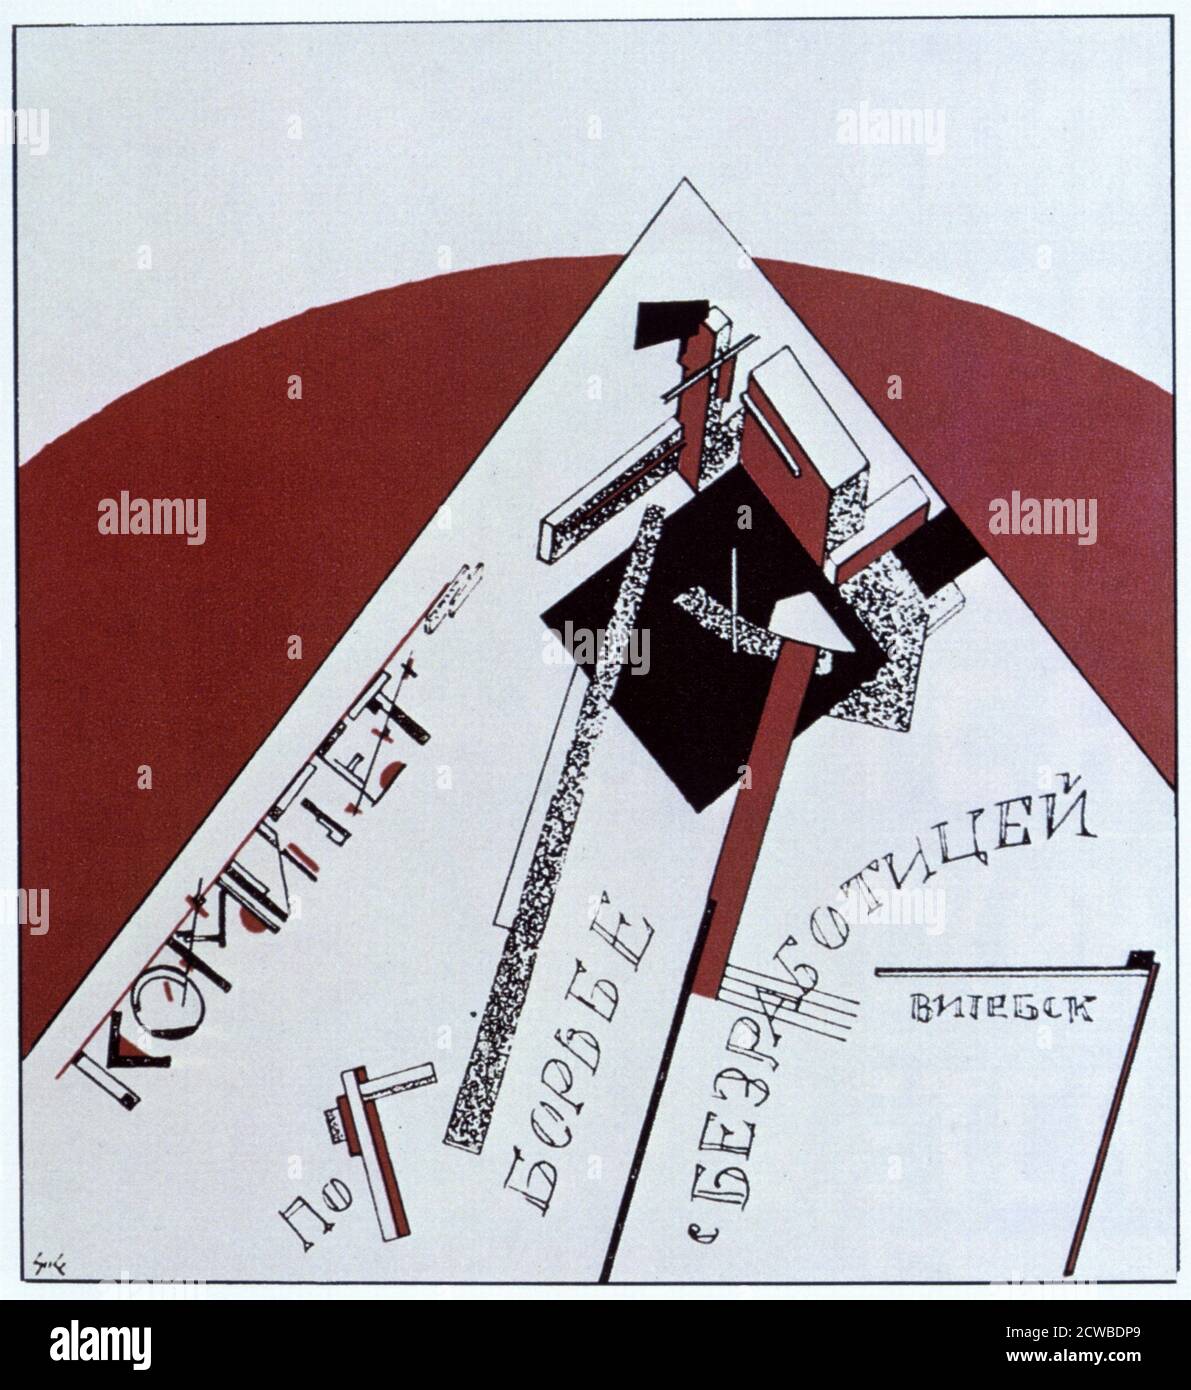 Cover design for a publication by the Soviet 'Committee to Combat Unemployment', 1919. Artist: Lazar Markovich Lissitzky, (1890 - 1941), known as El Lissitzky, was a Russian artist, designer, photographer, typographer. He was an important figure of the Russian avant-garde. His work greatly influenced the Bauhaus and constructivist movements. In 1921, he took up a job as the Russian cultural ambassador to Weimar Germany, working with and influencing important figures of the Bauhaus and De Stijl movements Stock Photo